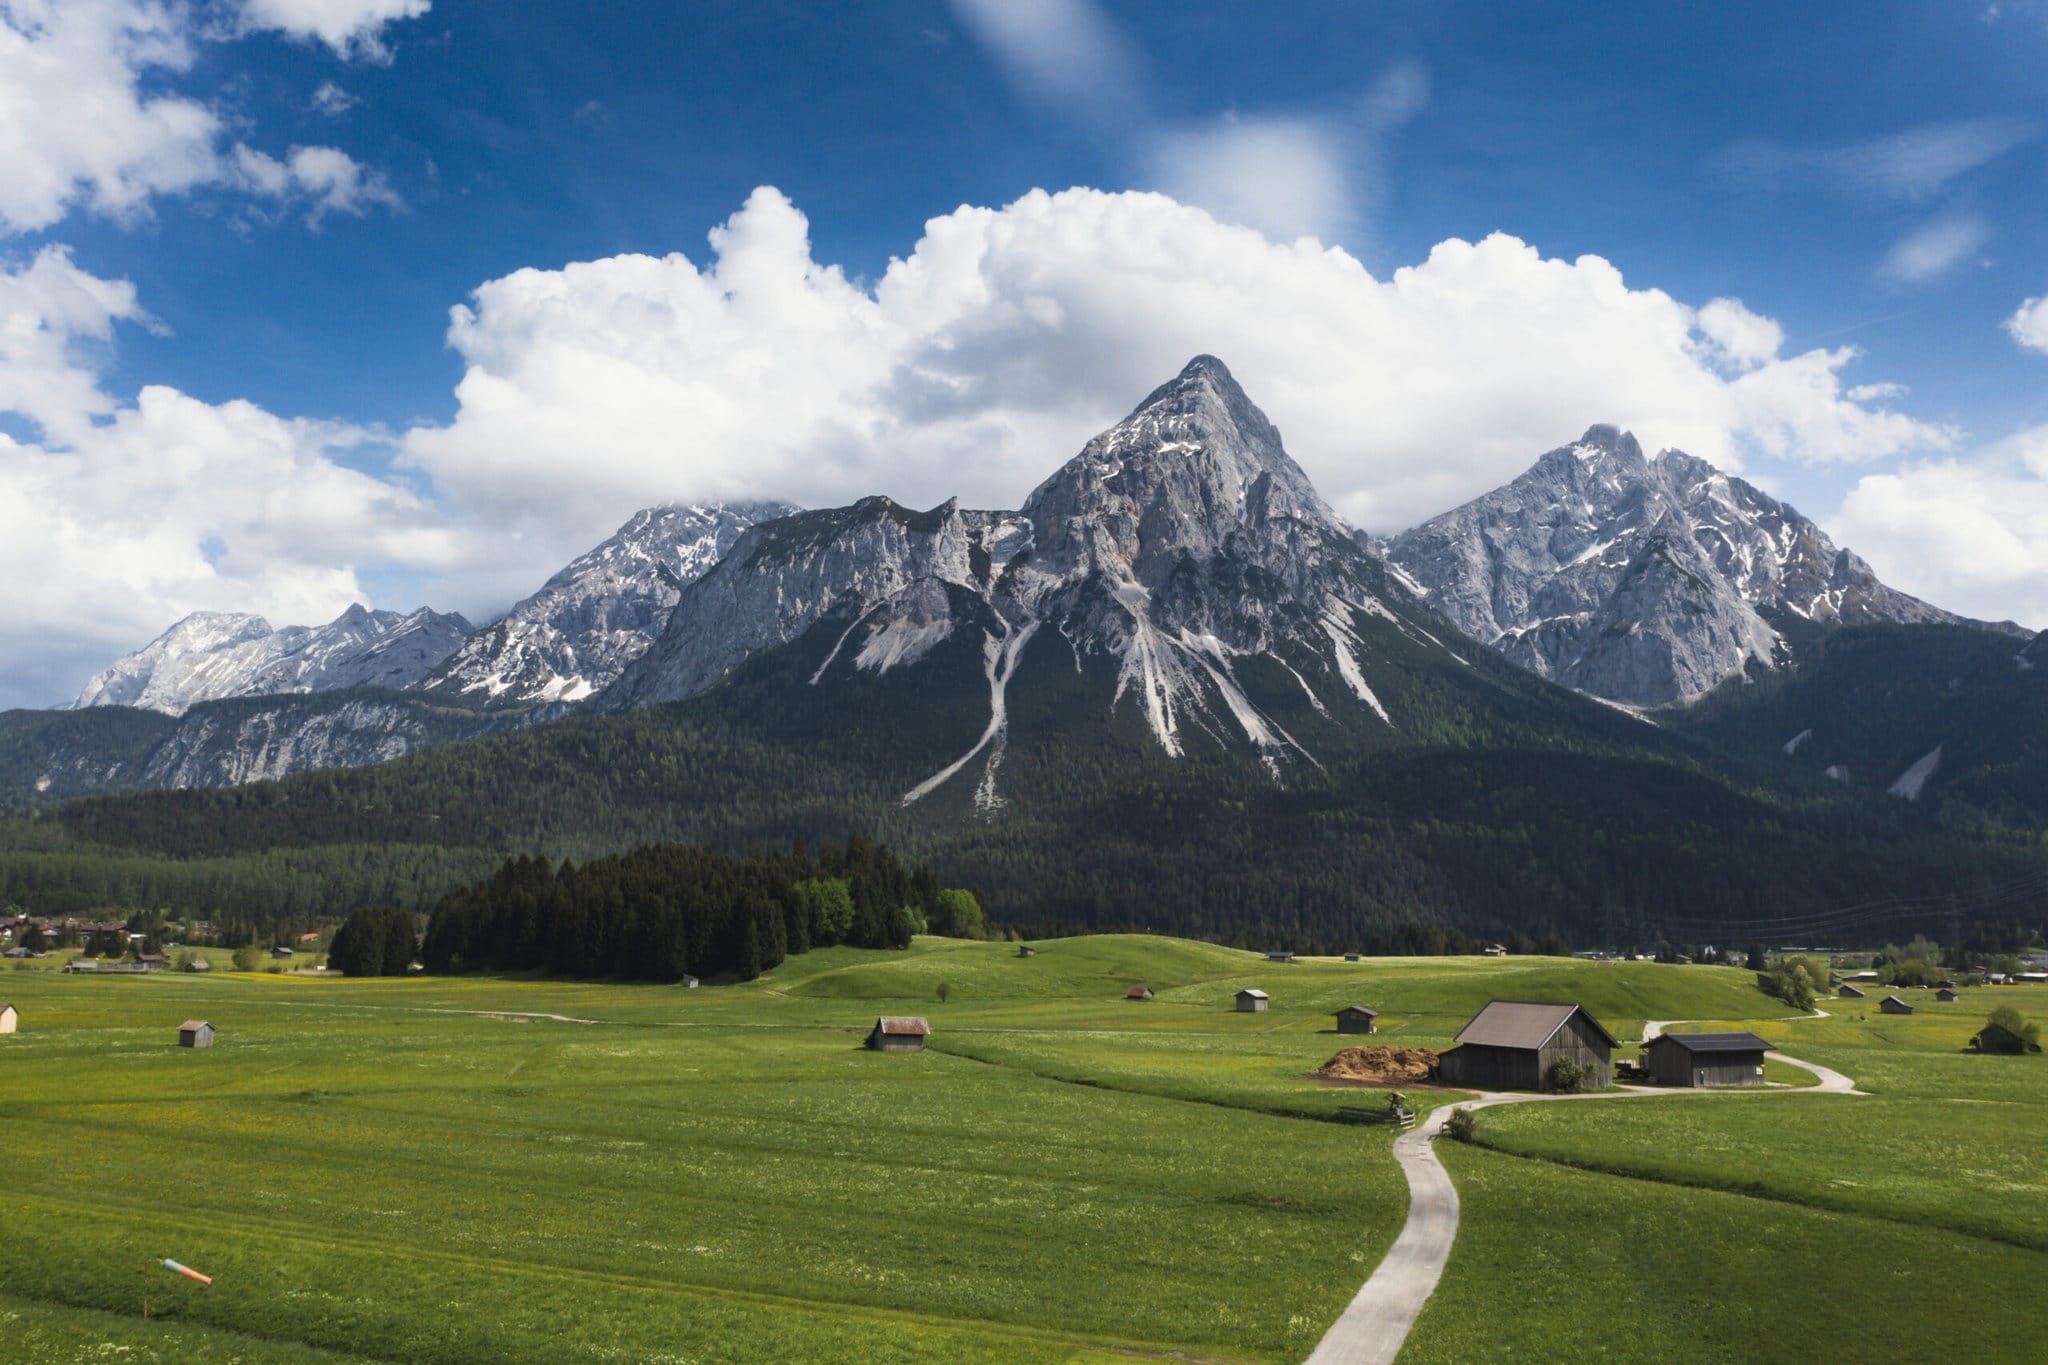 View from Lermoos to Ehrwald and Zugspitze, Zugspitz Massif, Tyrol, Austria